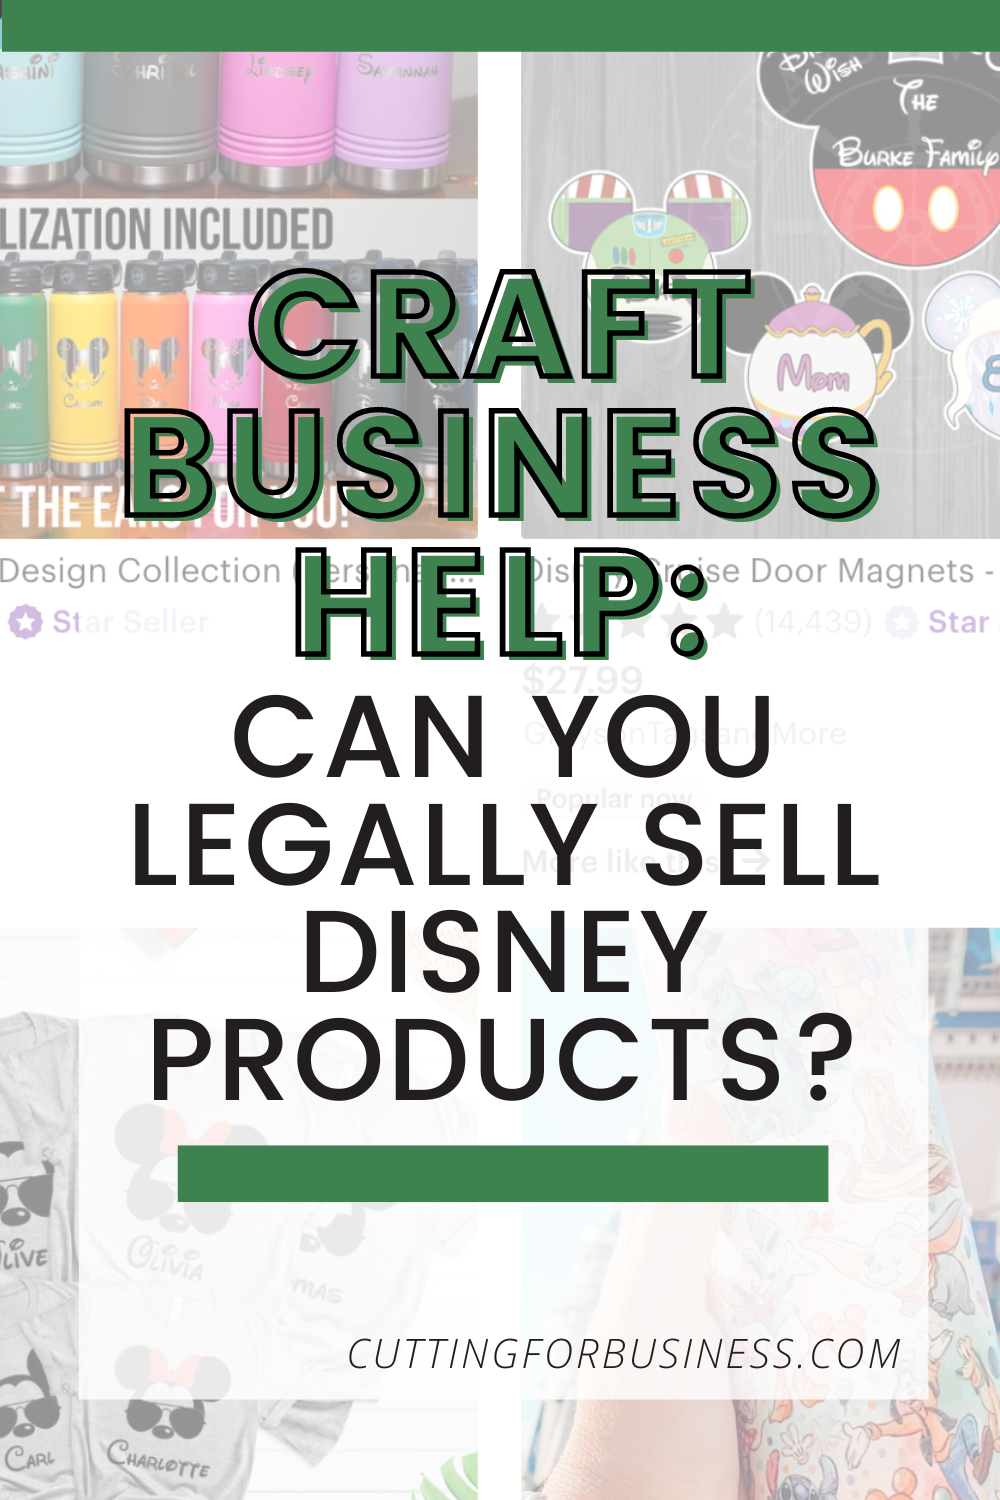 Can You Legally Sell Disney Products? - cuttingforbusiness.com.